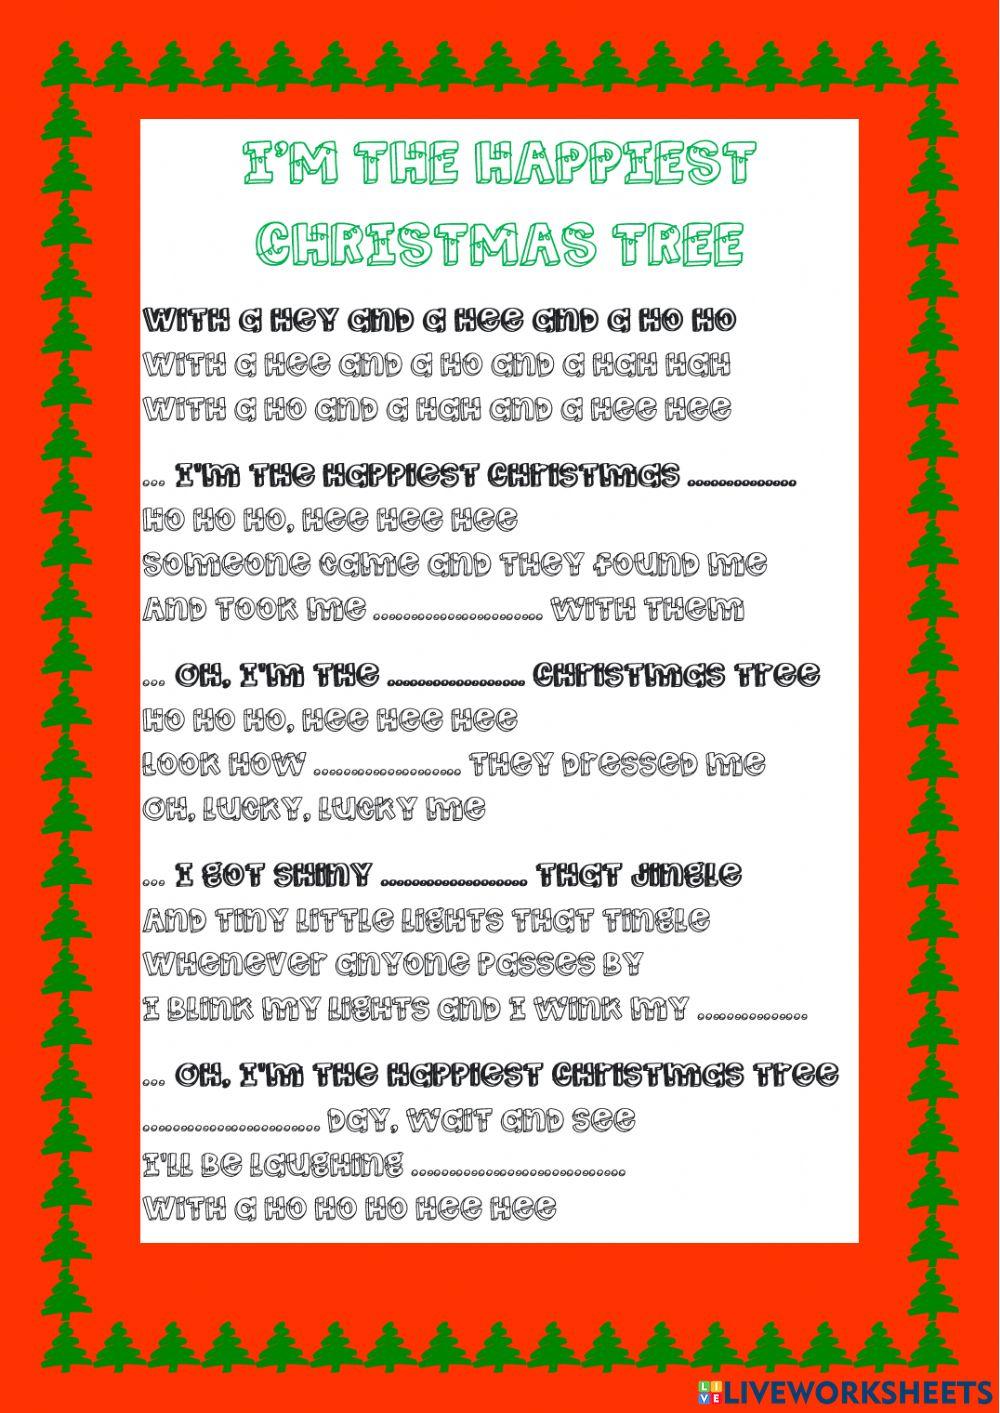 I'm the happiest christmas tree song worksheet | Live Worksheets